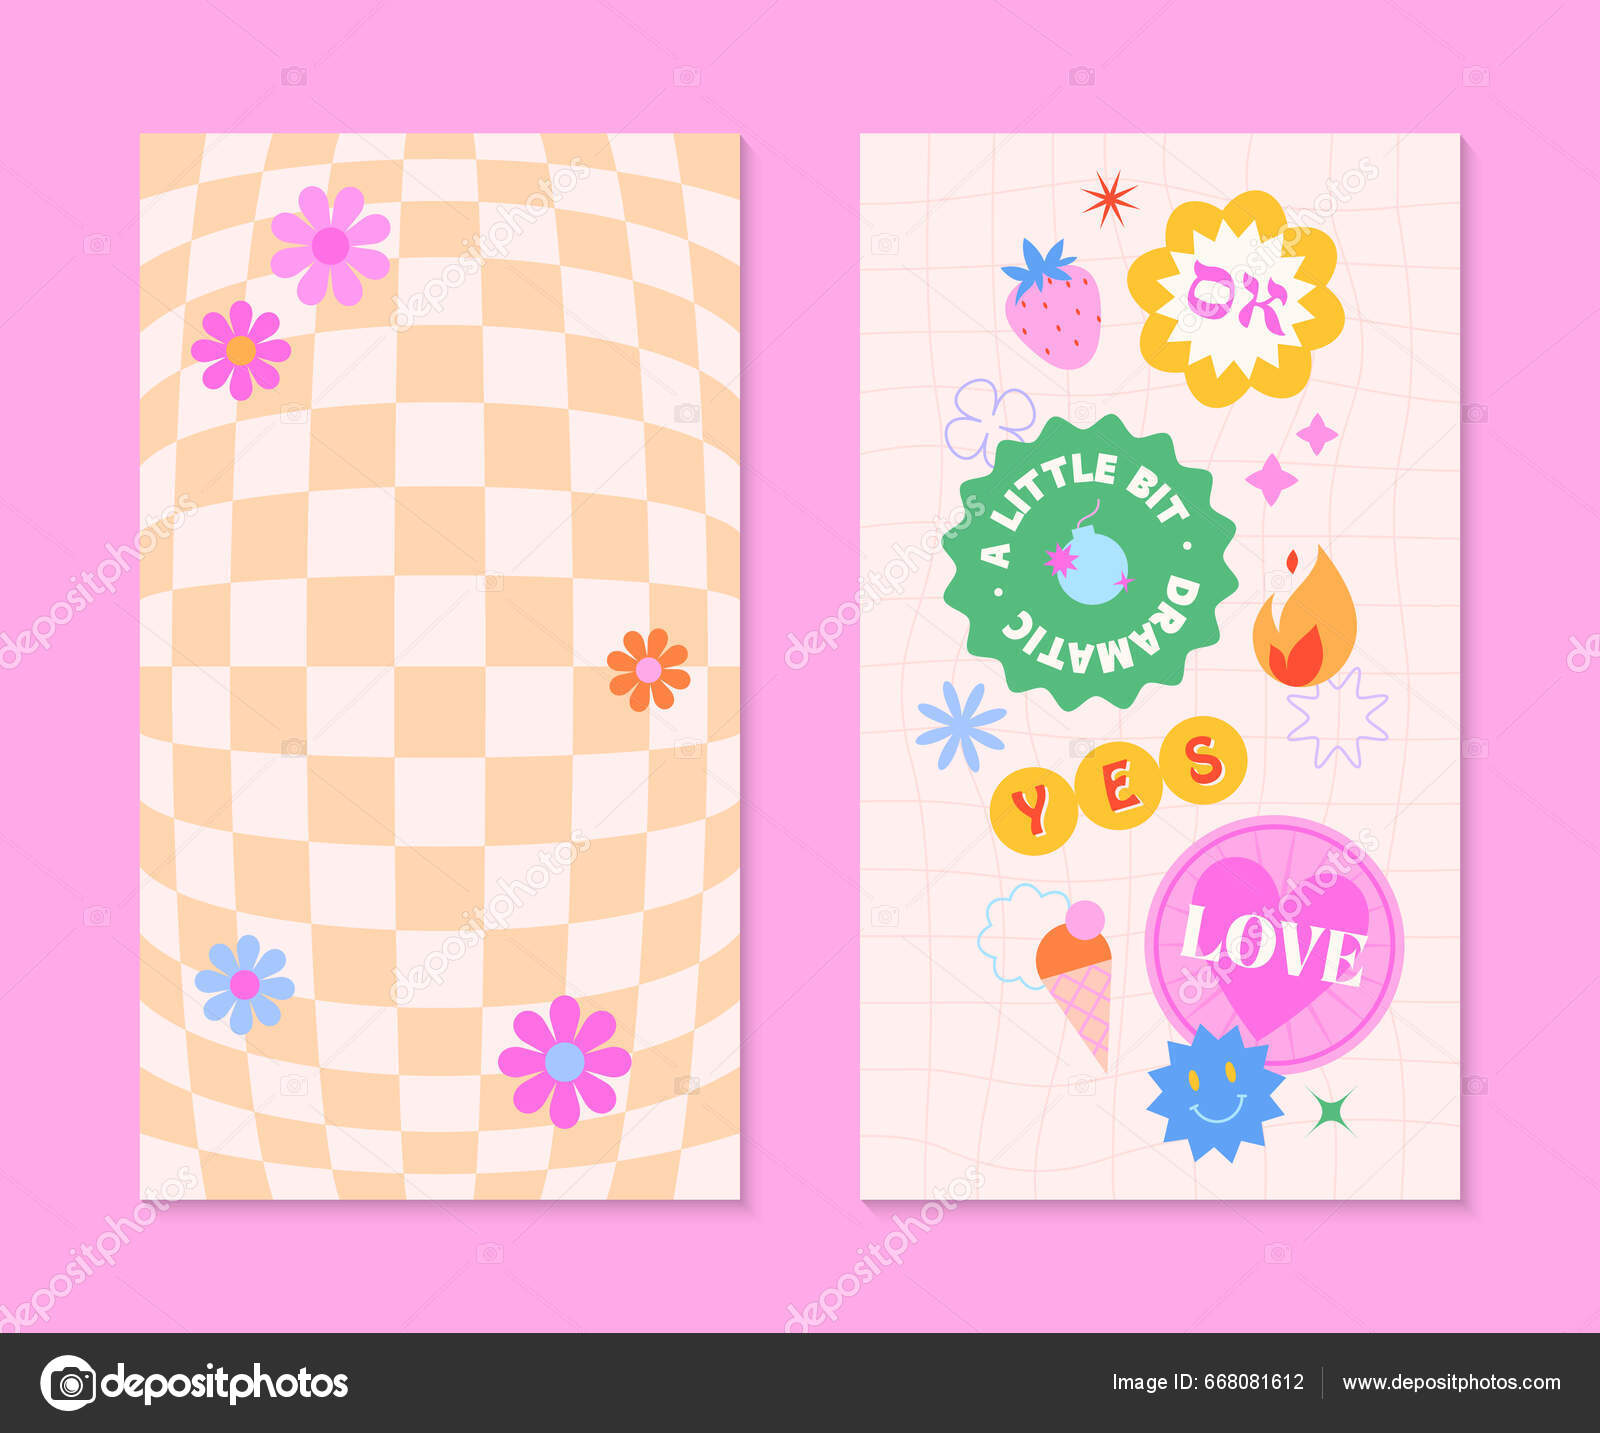 Premium PSD  Cute stationery set mockup psd in abstract